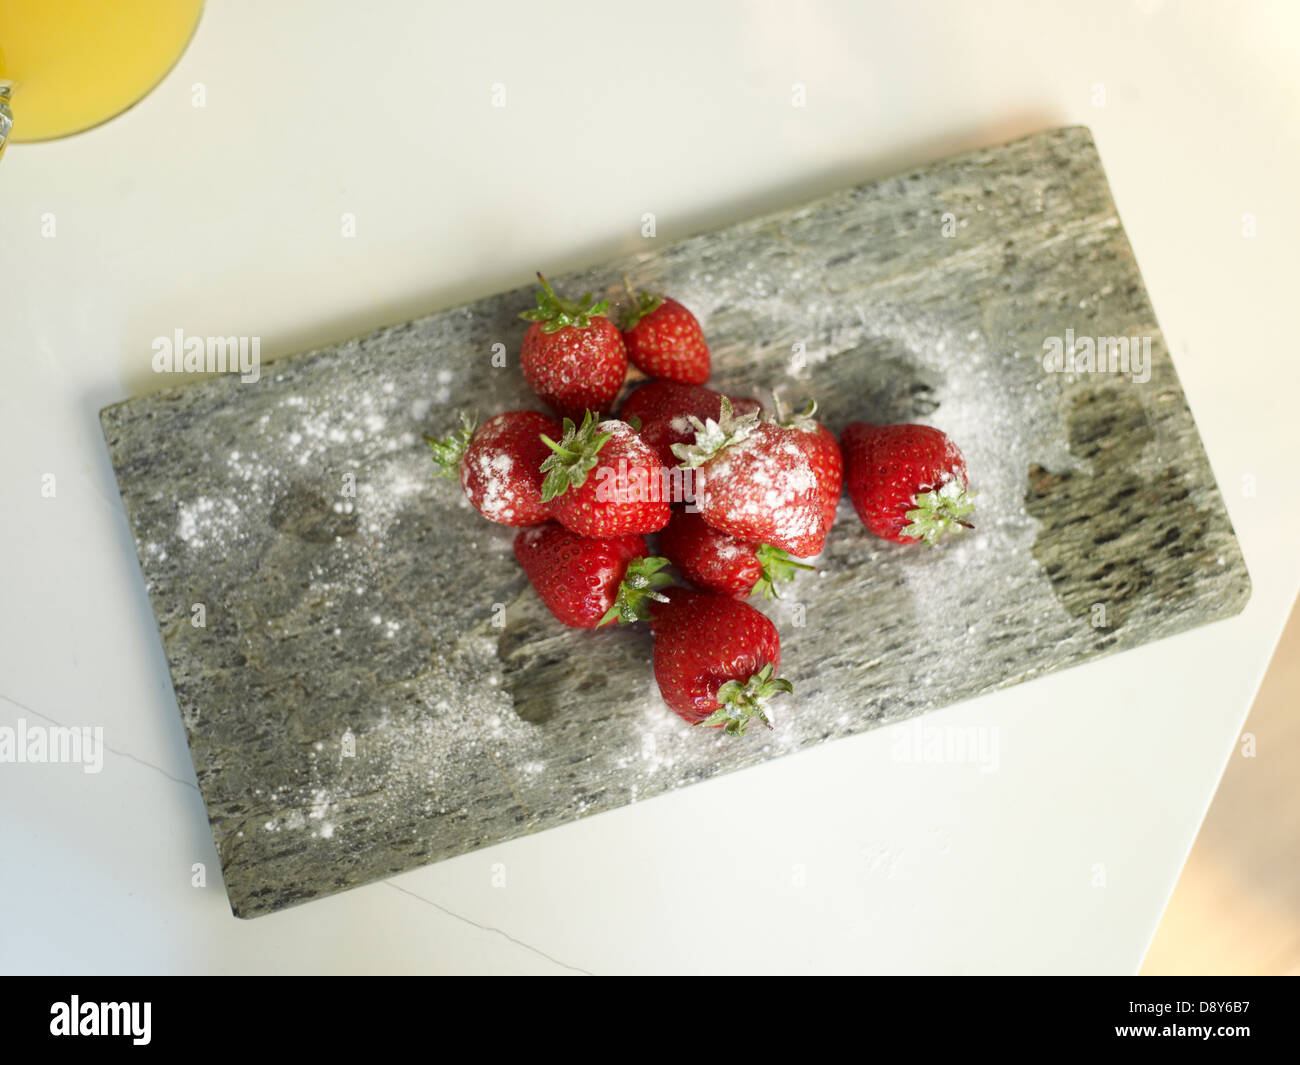 A plateful of strawberries placed on a wooden board, coated with dusting. Stock Photo